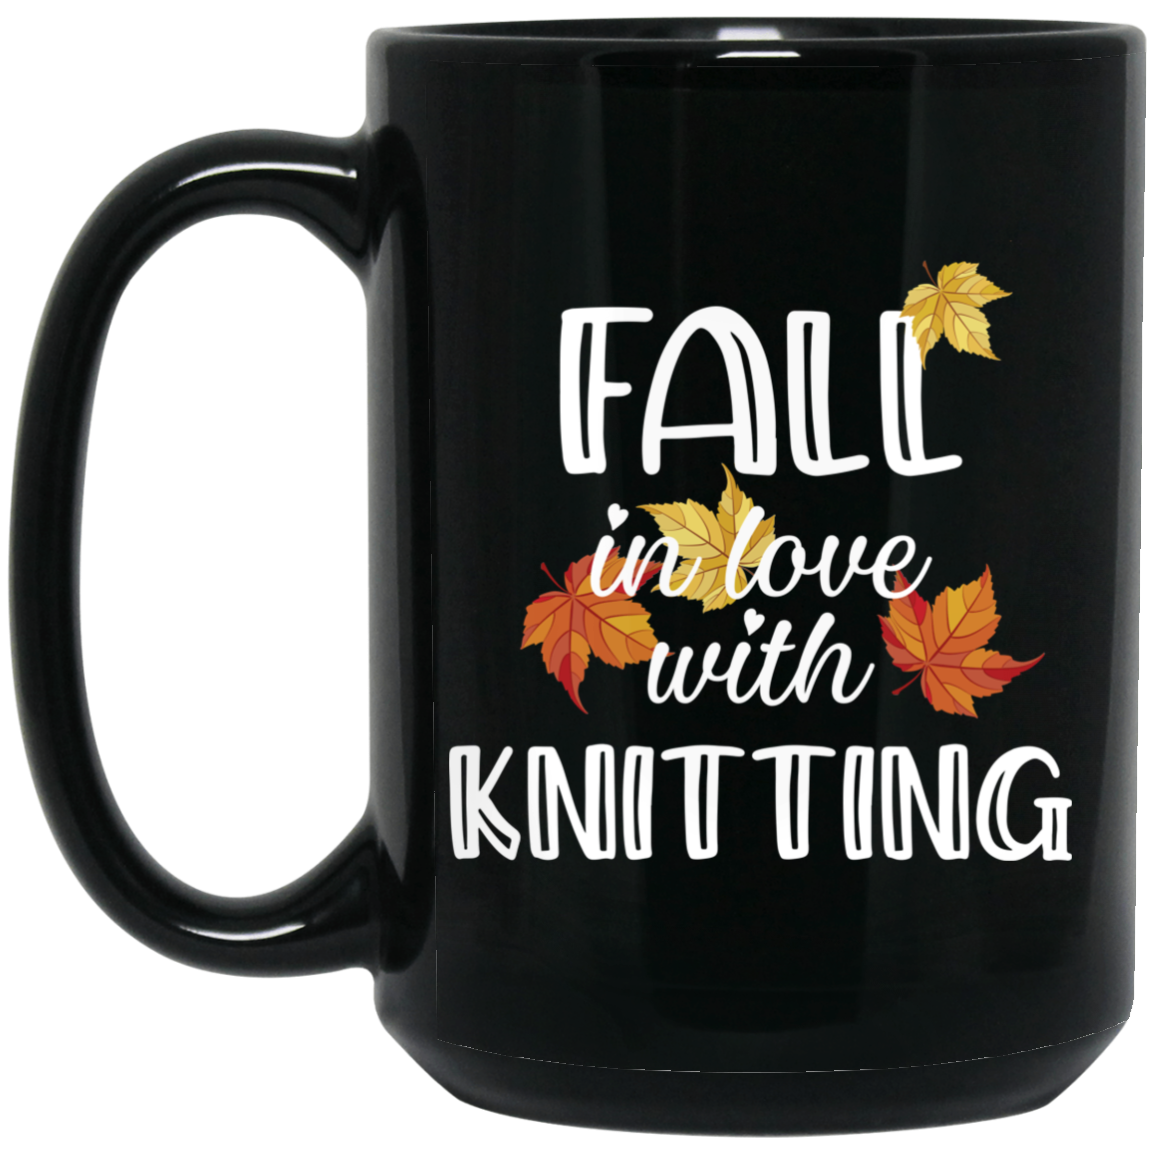 Fall in Love with Knitting Black Mugs